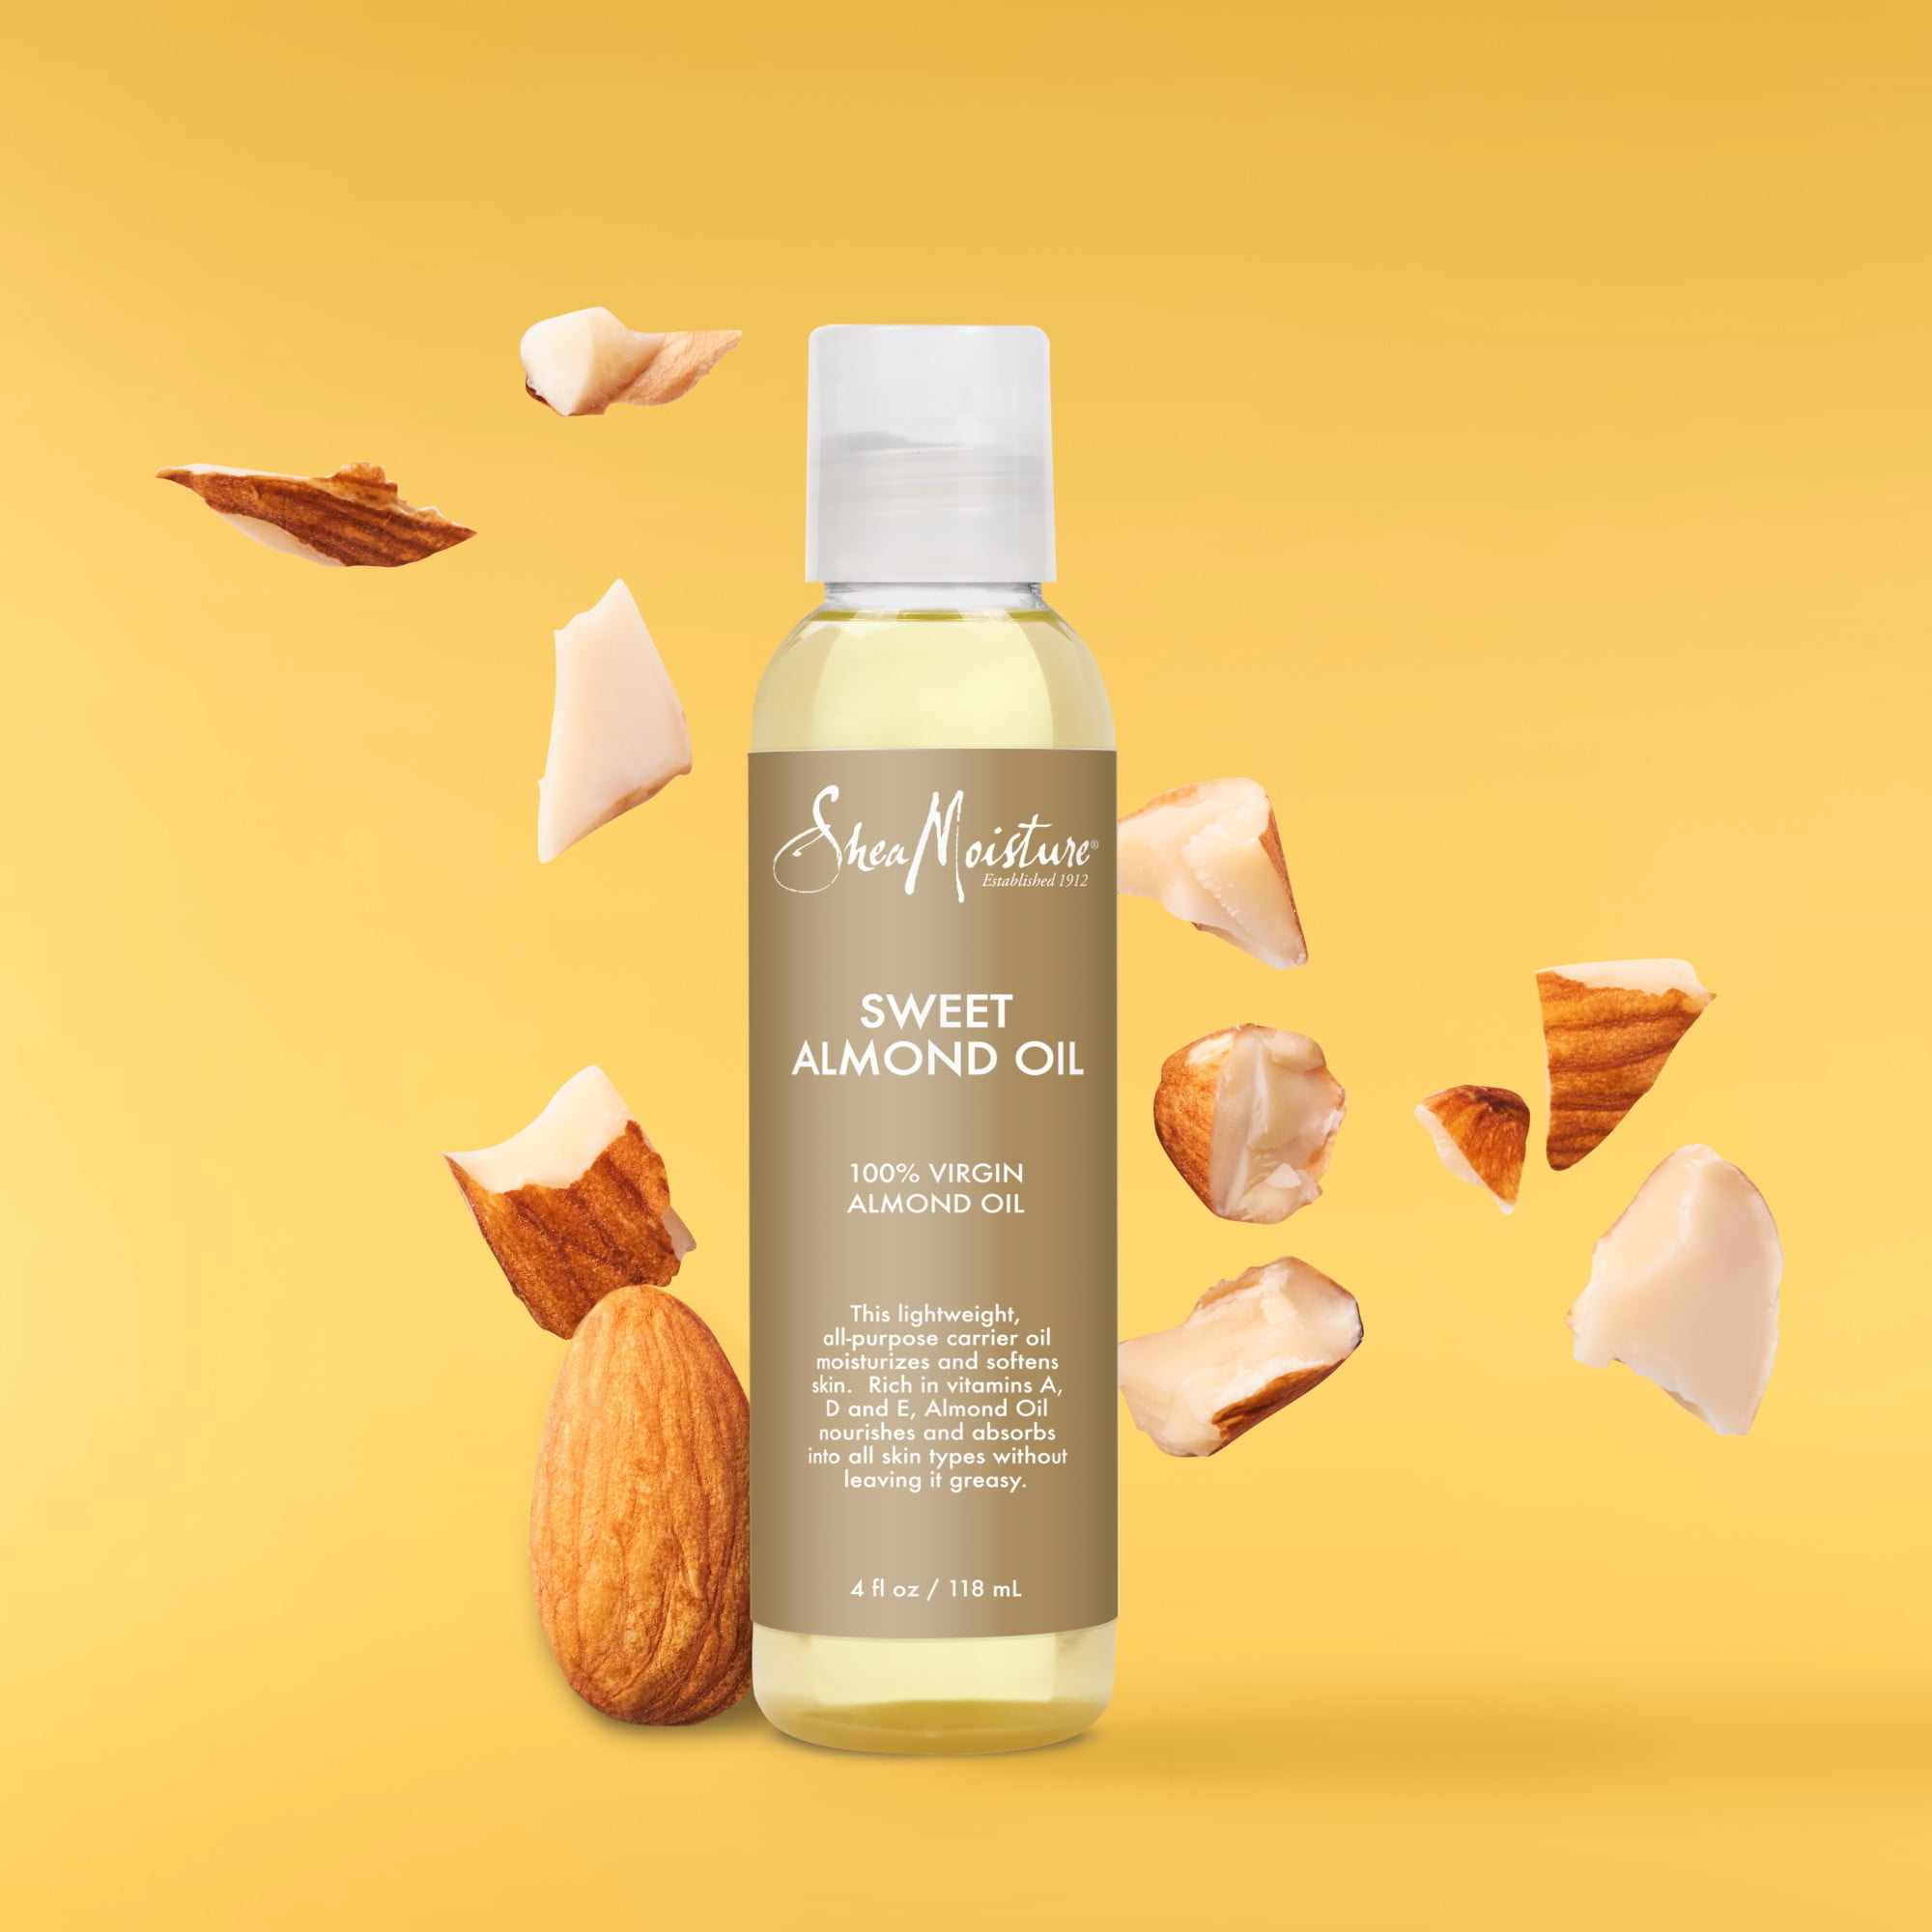 Bottle of Shea Moisture Sweet Almond Oil surrounded by almond pieces on a yellow background